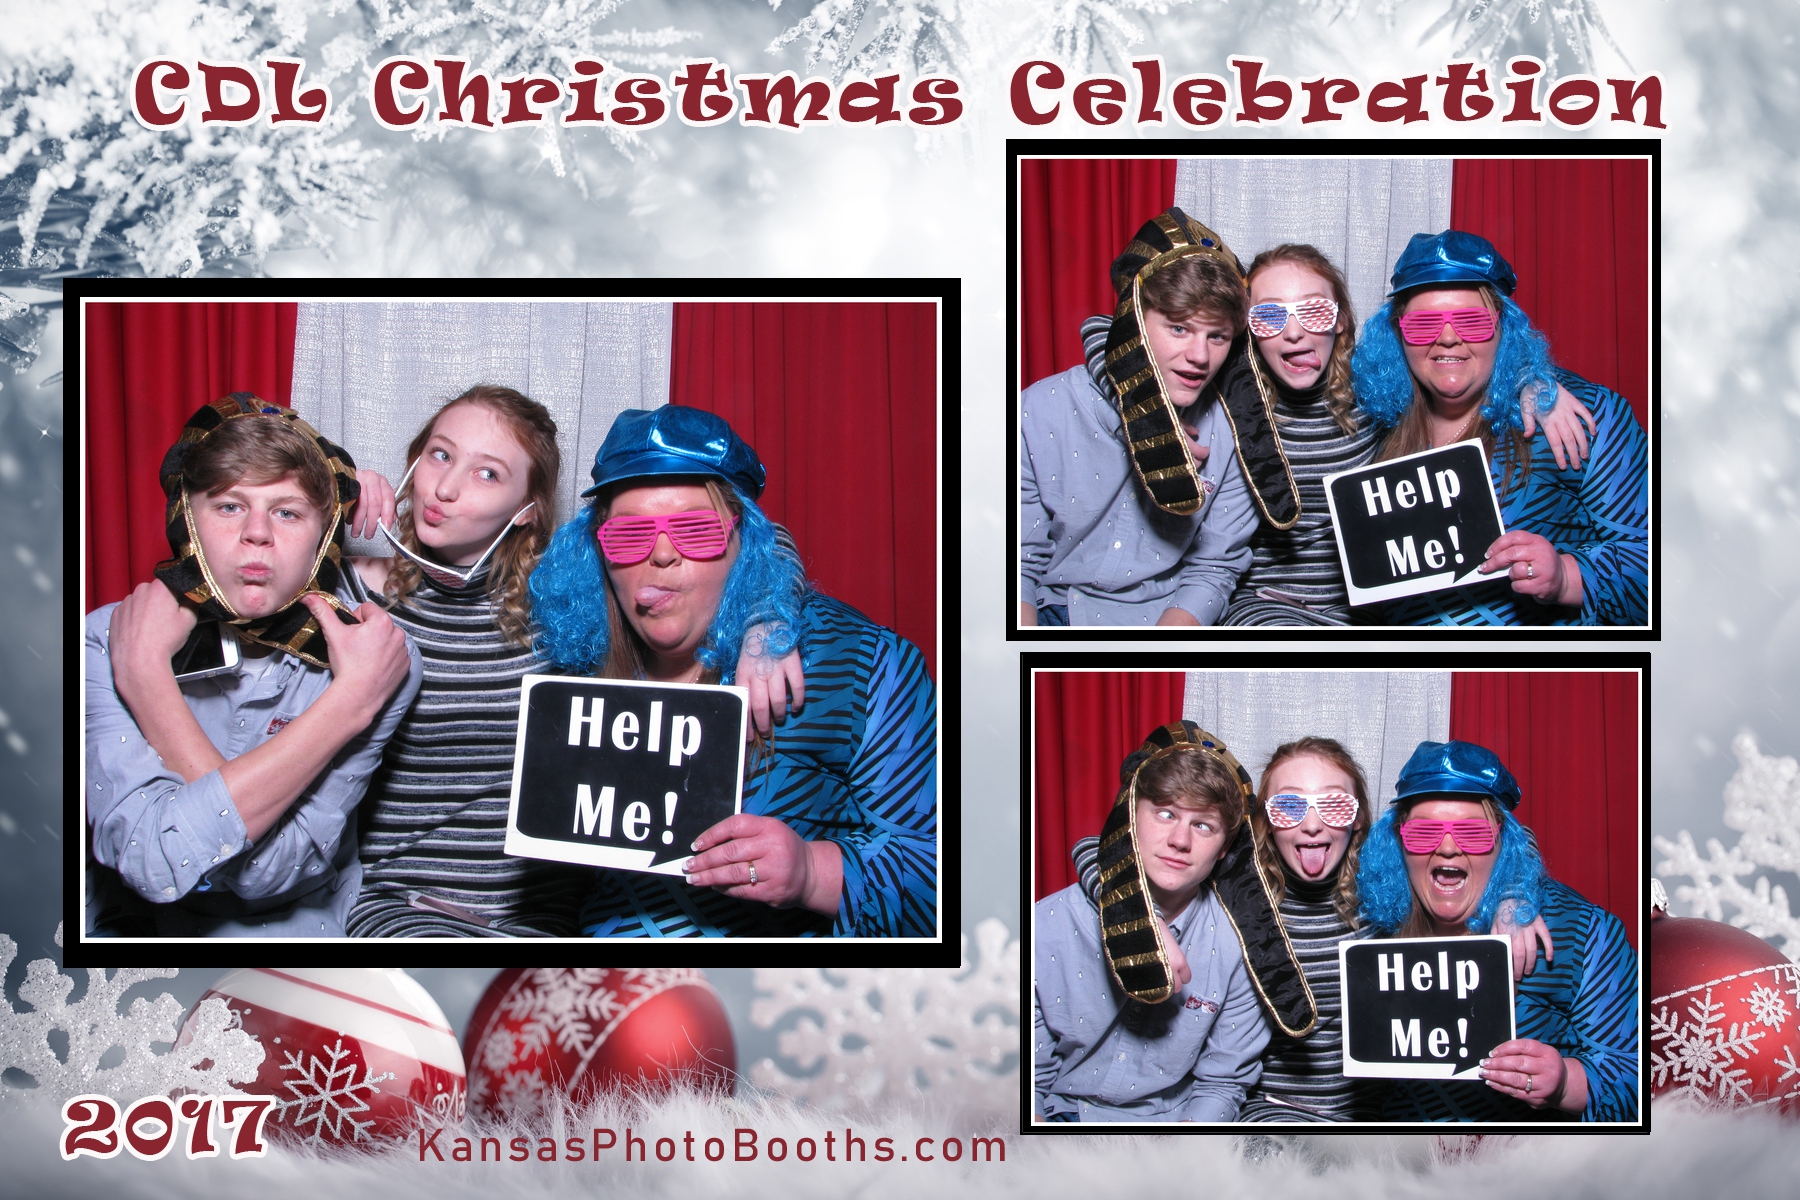 Corporate photo booth picture example with holiday theme.